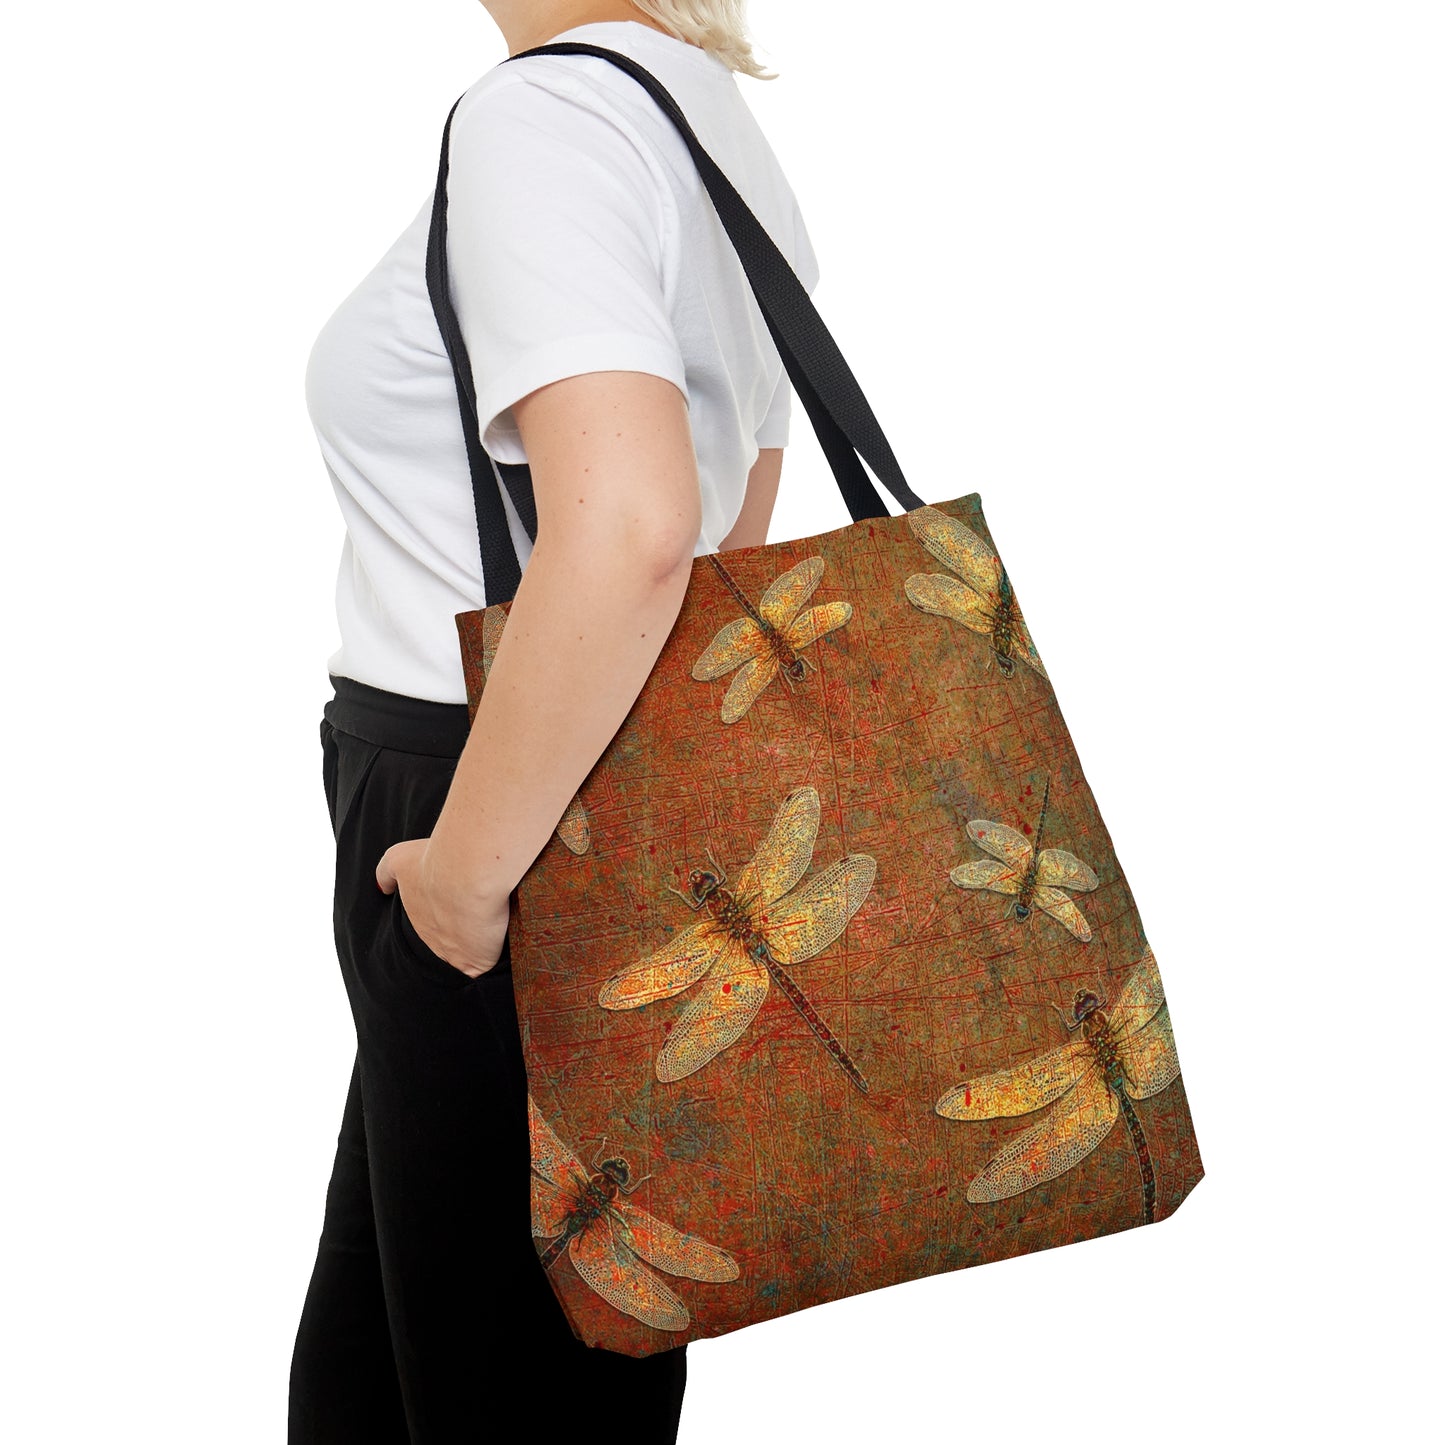  Flight of Golden Dragonflies on Brown Stone Printed on Tote Bag large with model